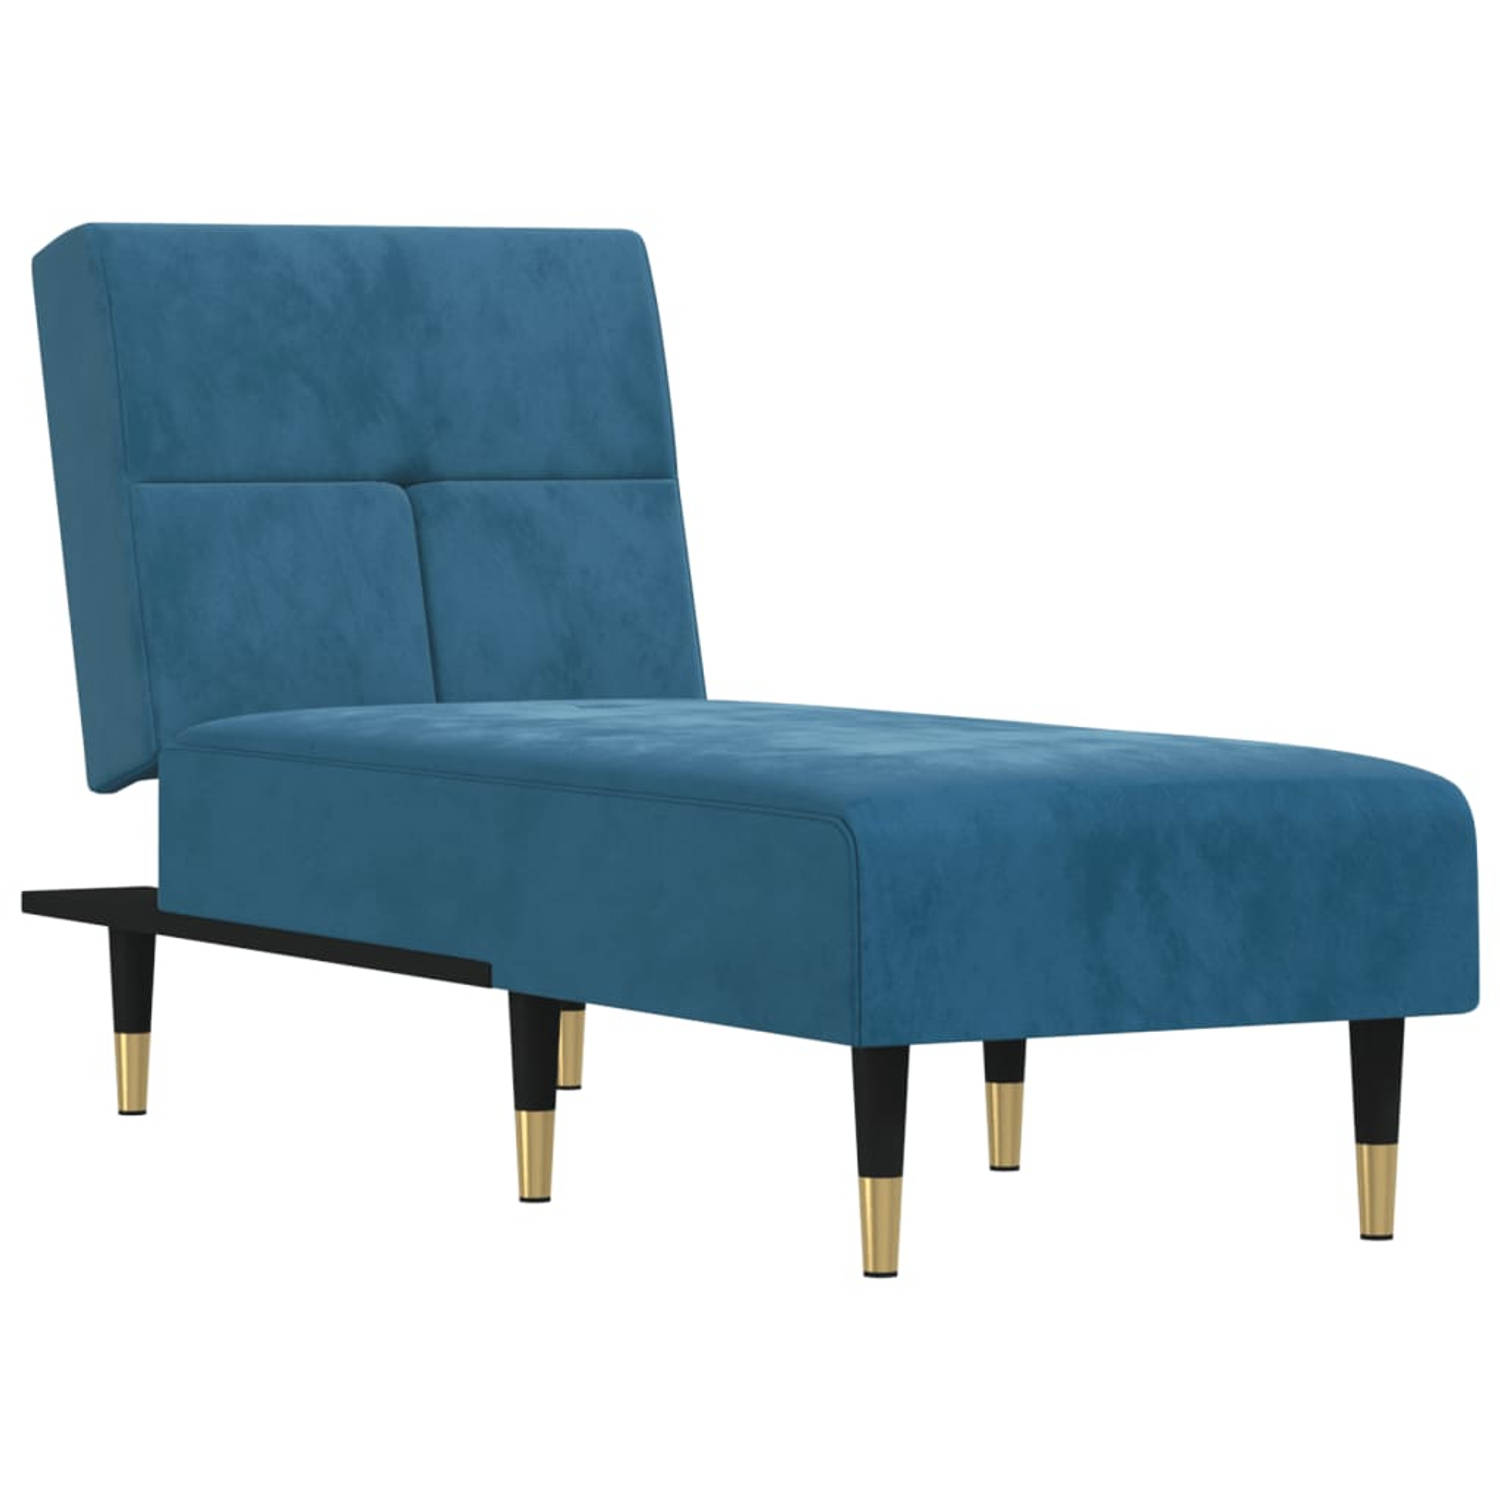 The Living Store Chaise longue fluweel blauw - Chaise longue